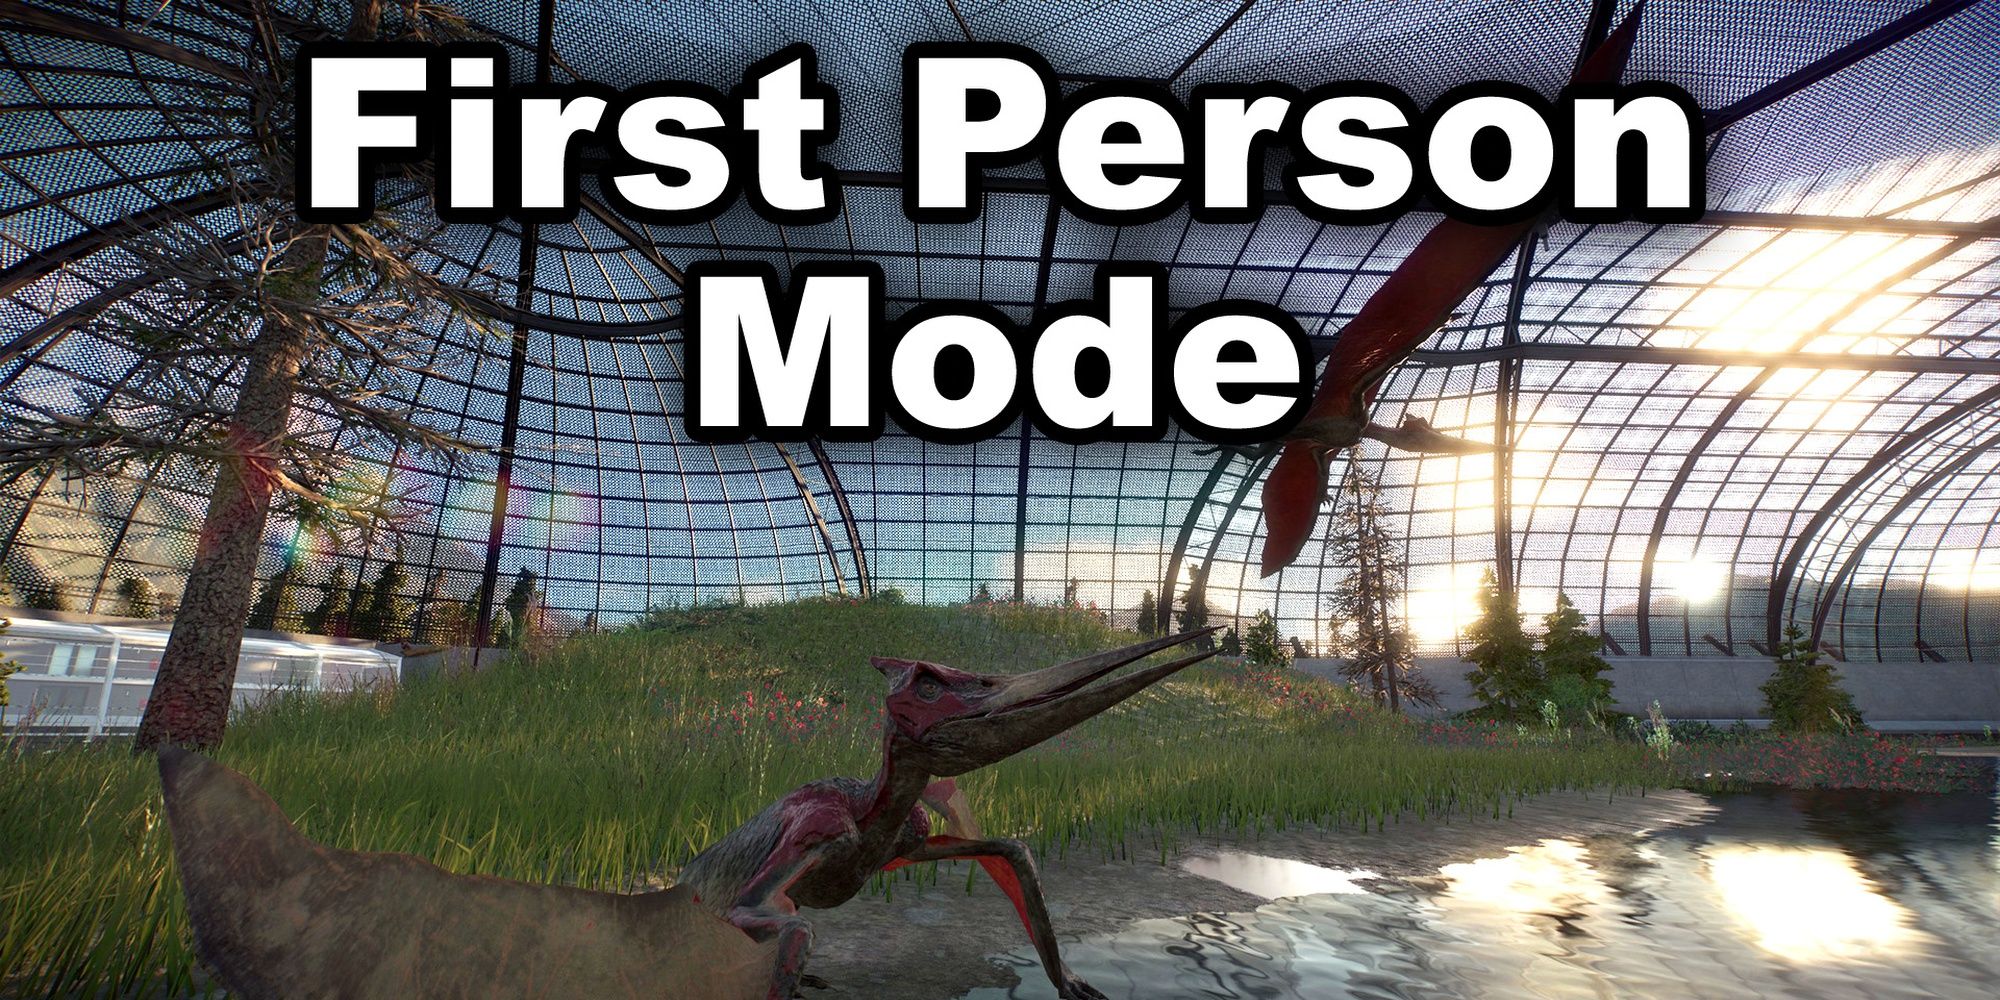 JWE2-First-Person-Mode-mod-banner-Cropped-1